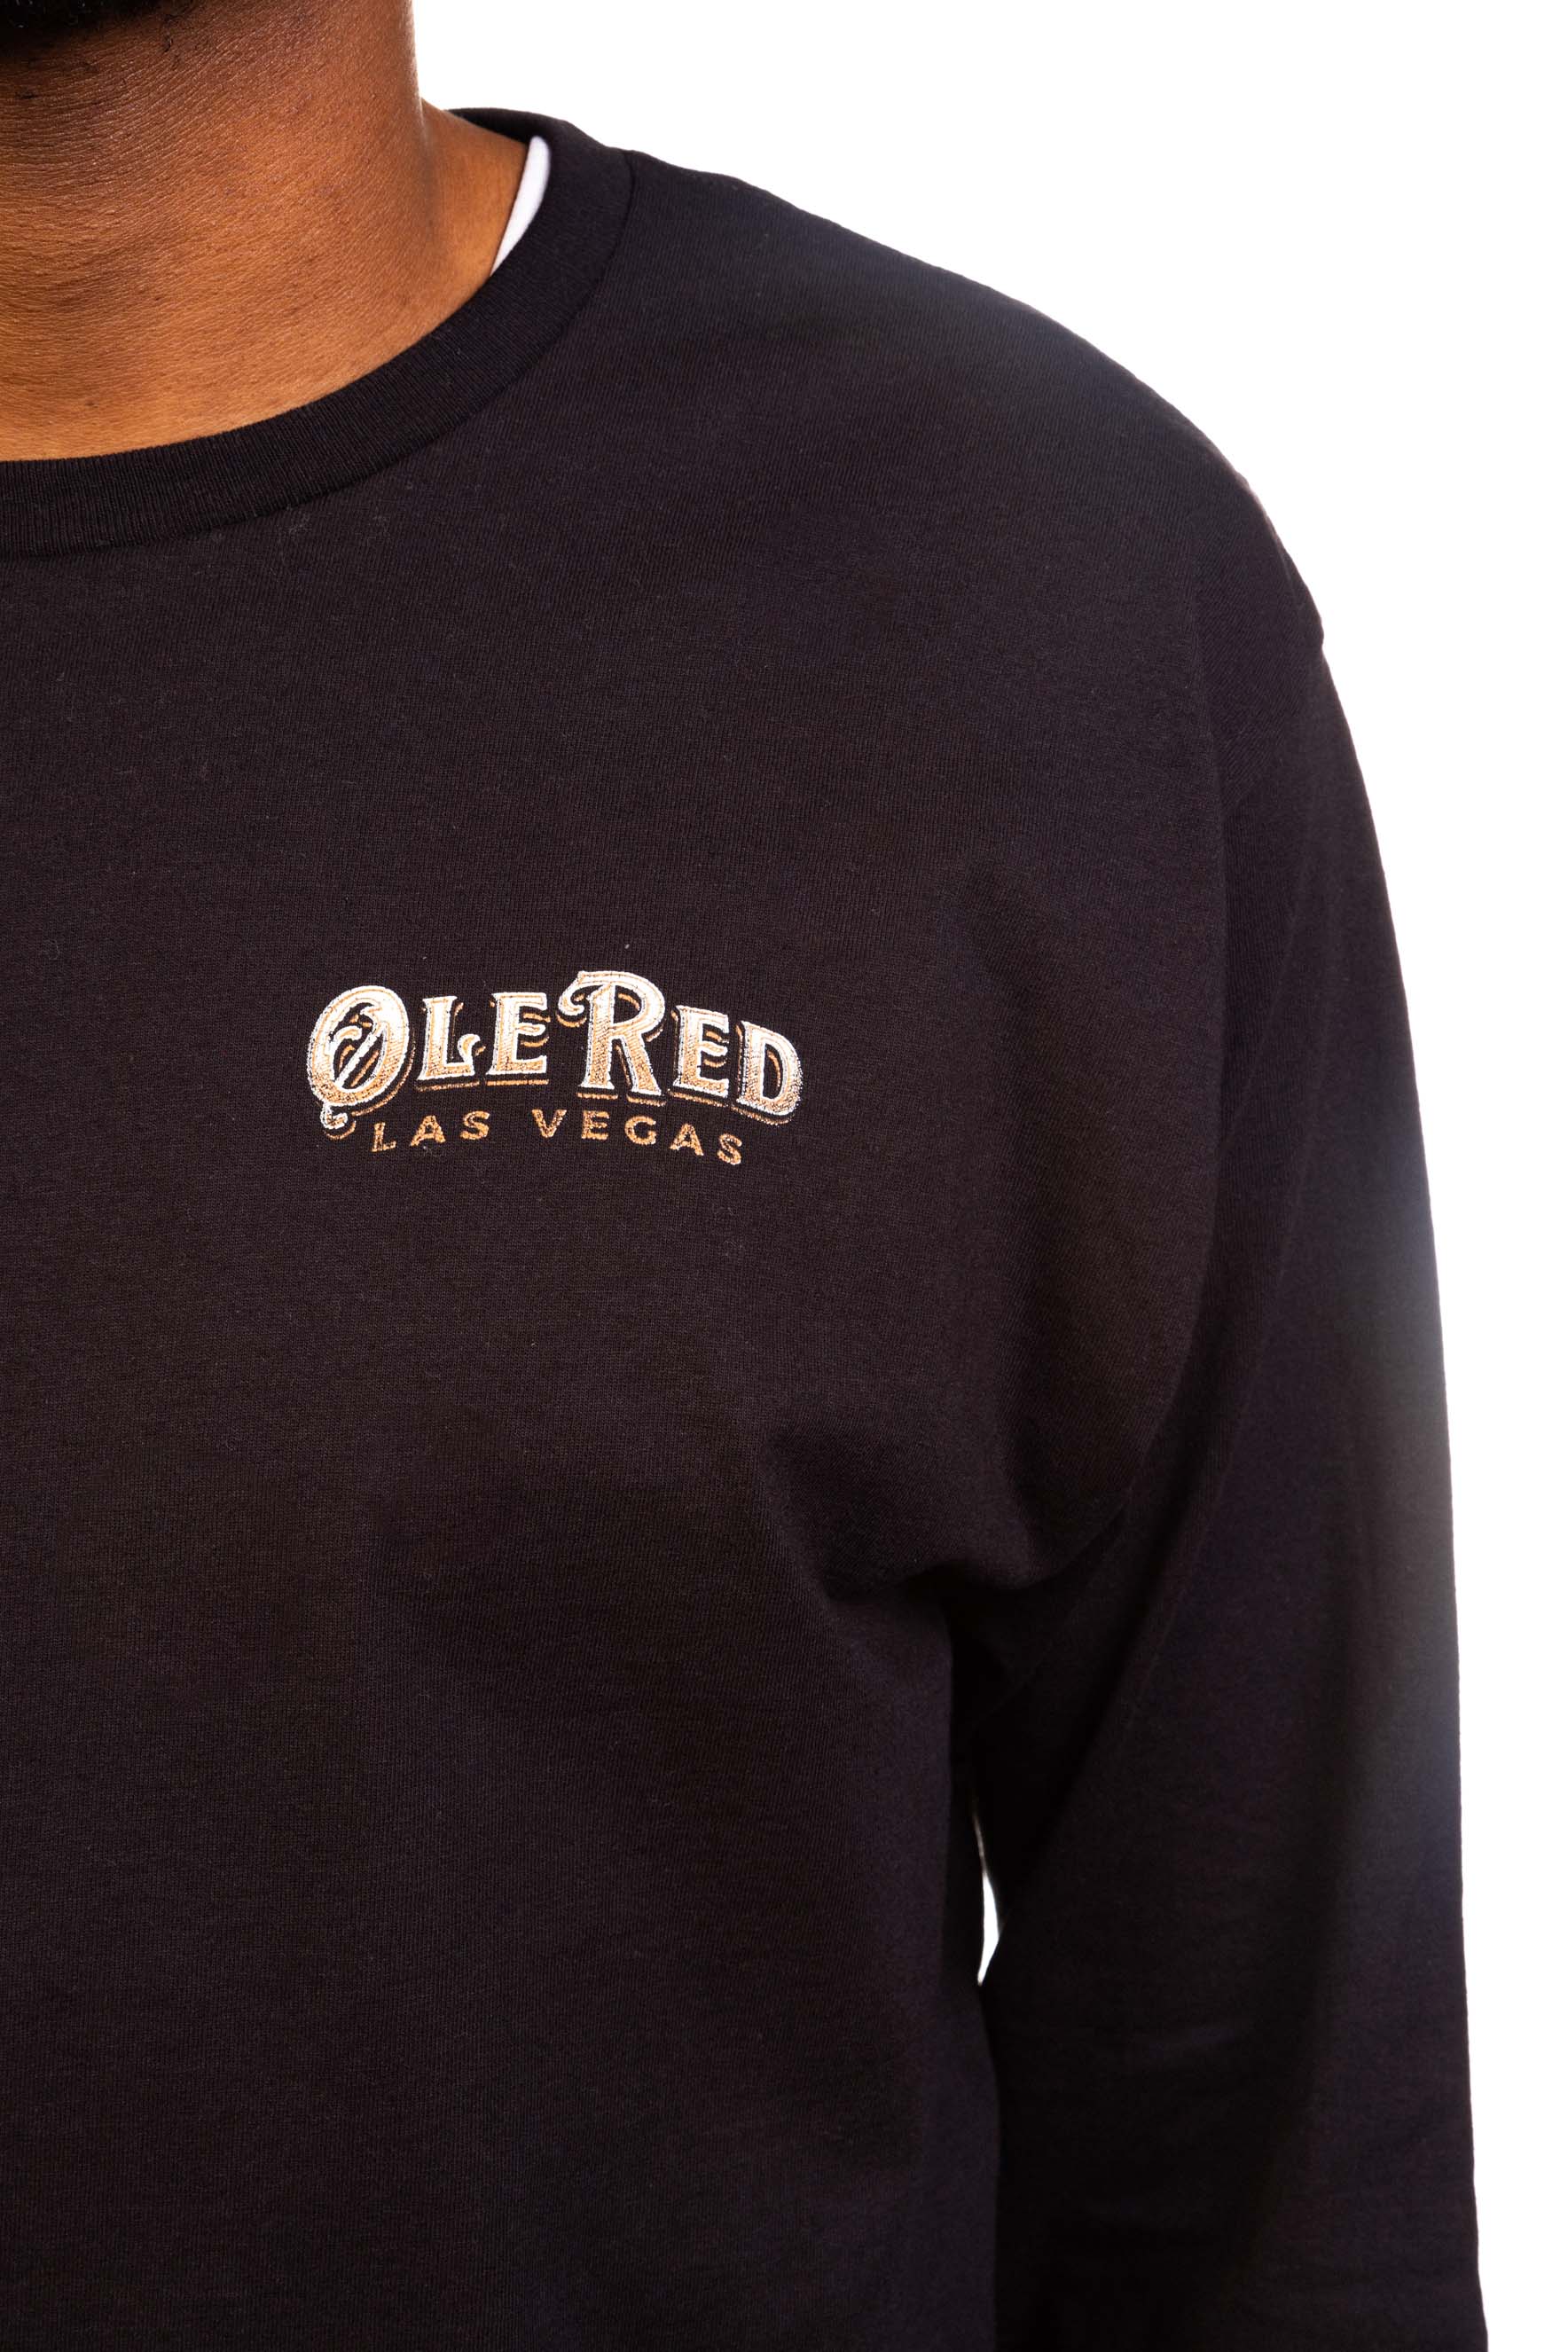 Ole Red Vegas Stumble Out Long-Sleeve T-Shirt